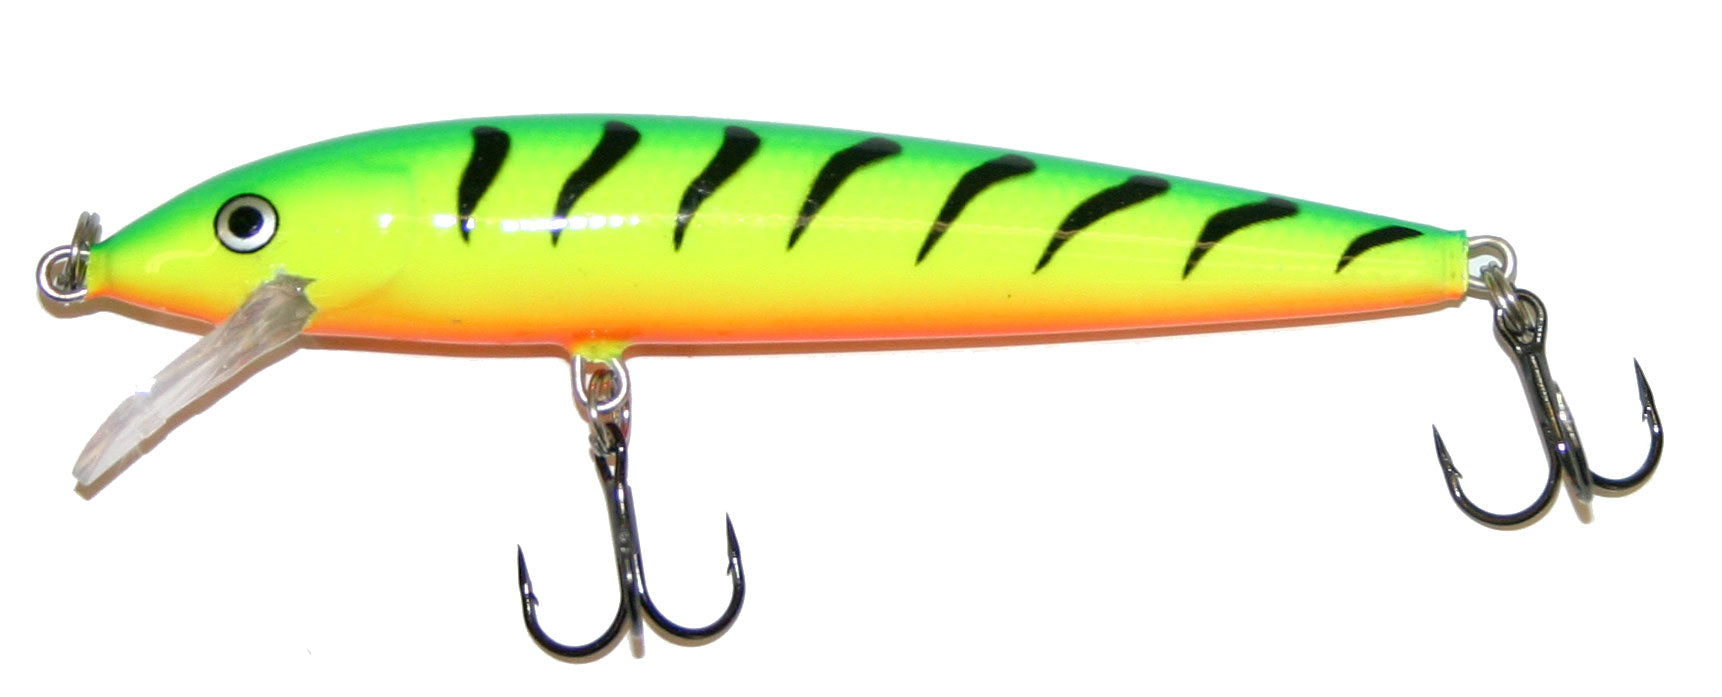 Rapala Husky Jerk 12 Fishing Lure 4.75 716oz Baby Bass - Suspending Action,  Loud Rattles, Superior Finishes